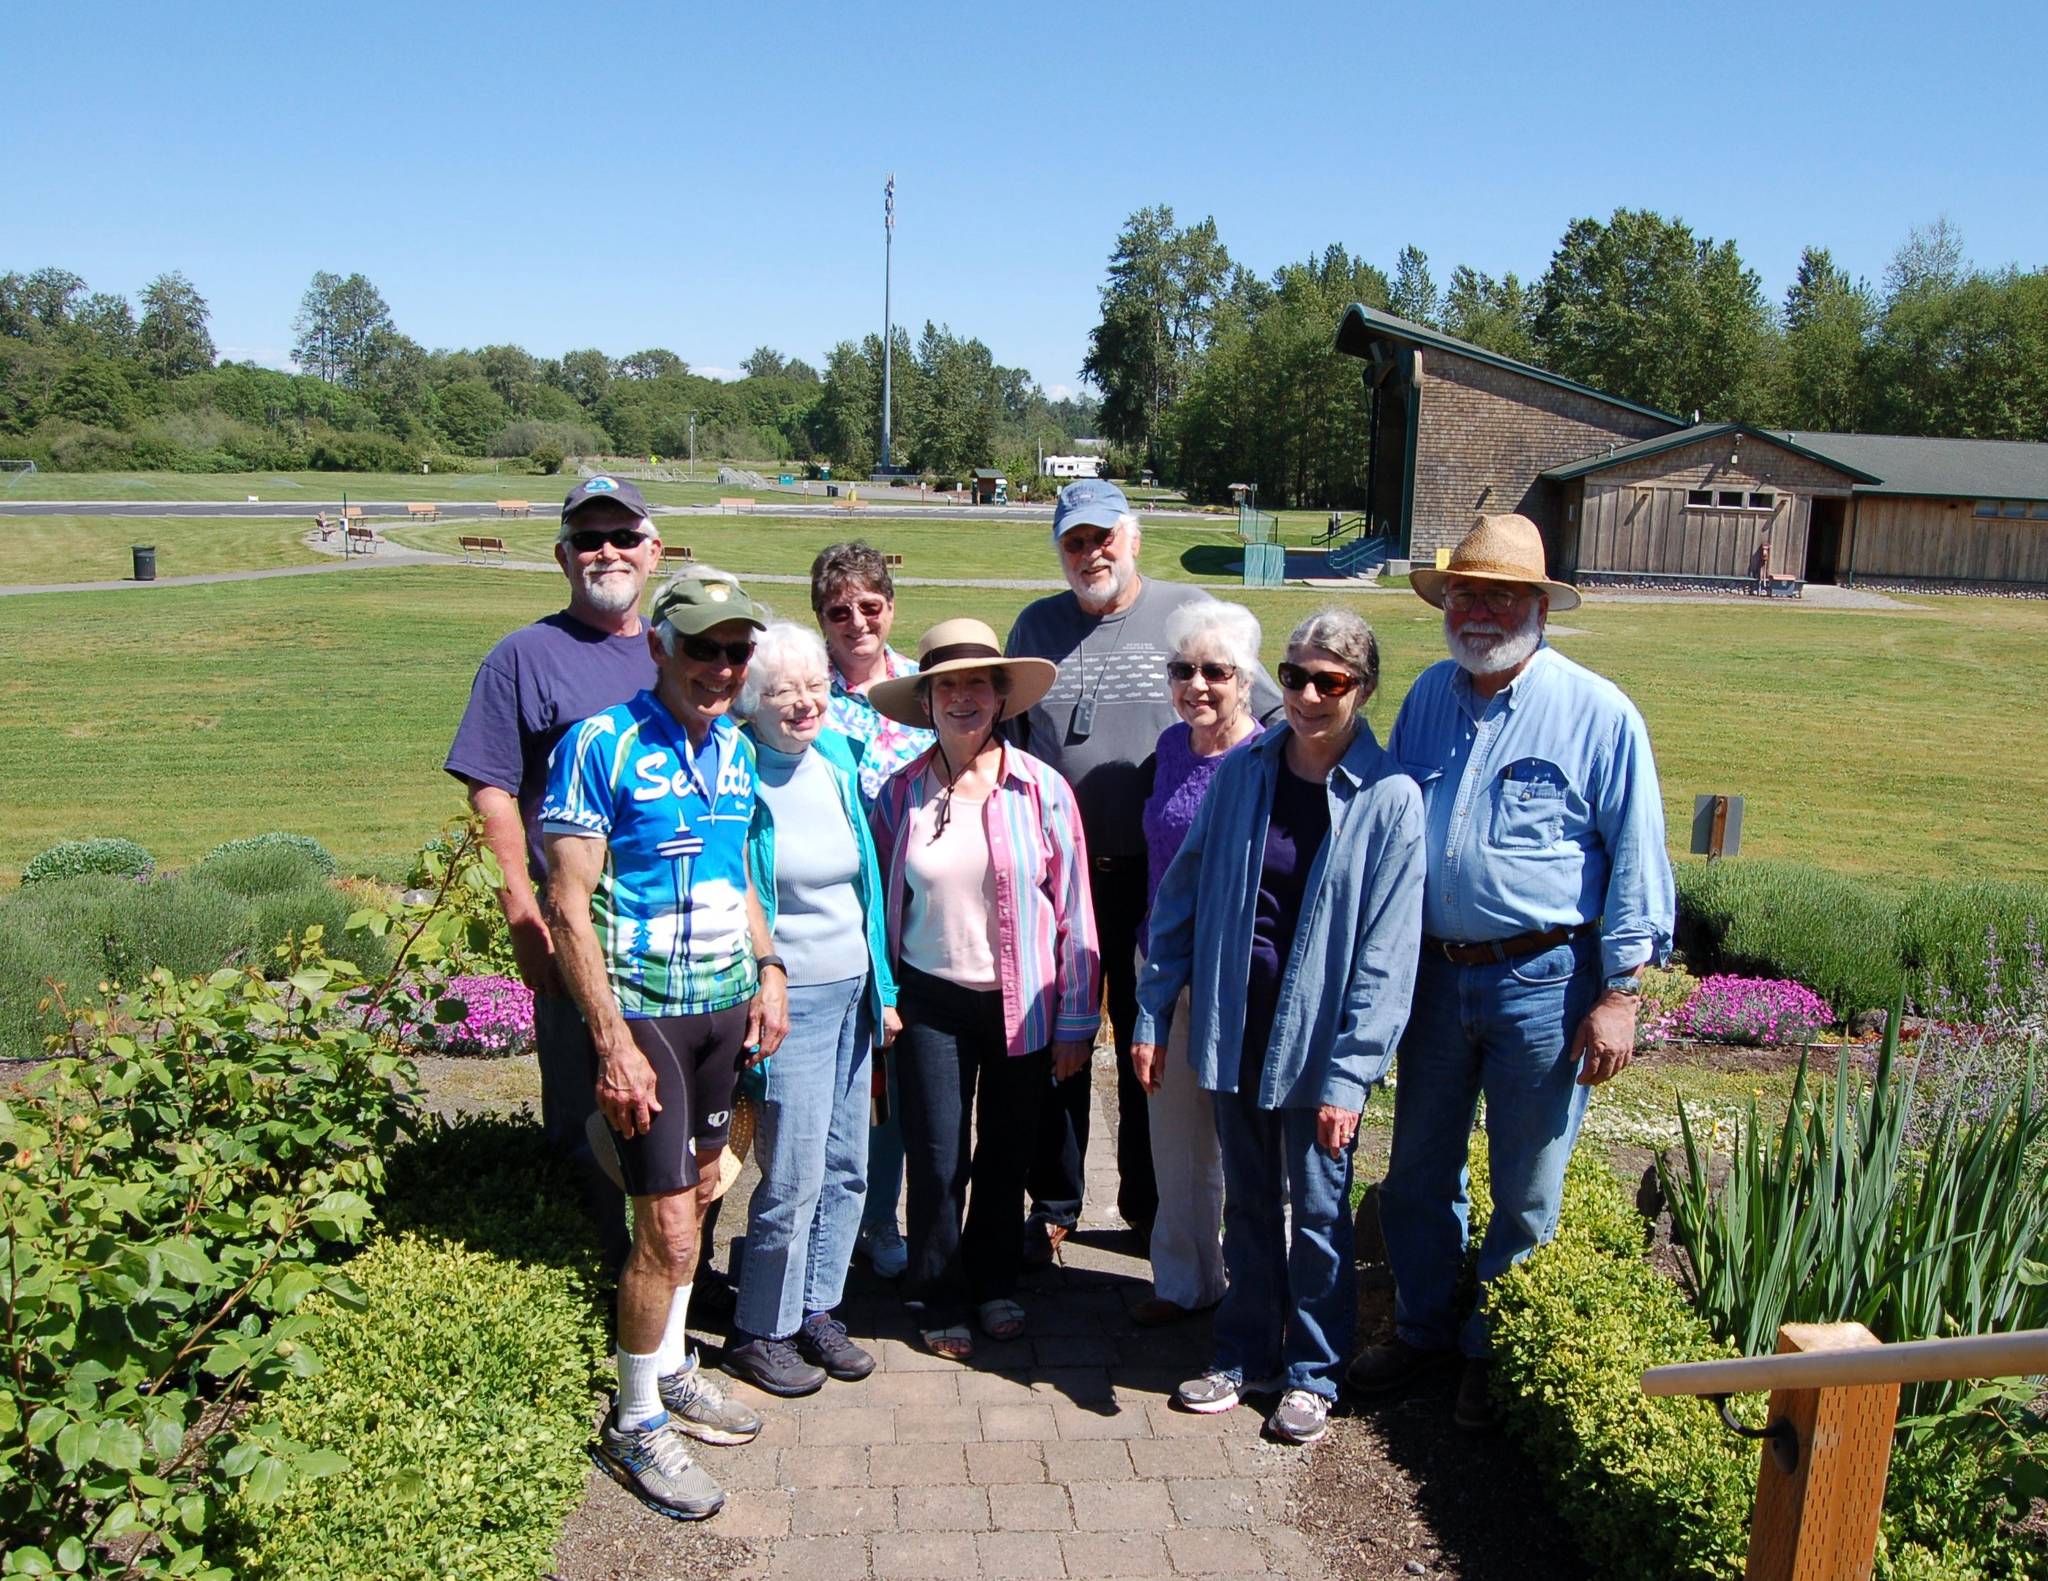 Erin Hawkins/Olympic Peninsula News Group                                Members of the Sequim Botanical Gardens Society — Lee Bowen, Dona Brock, Jean Pier, Donni Hatlestad, Kathy Pitts, John Hassel, Maryann Ballard, Stu Hemstreet and Andy Pitts — stand where a pergola will be landscaped in as part of the planned rose garden that will be an addition to the Sequim Botanical Gardens.